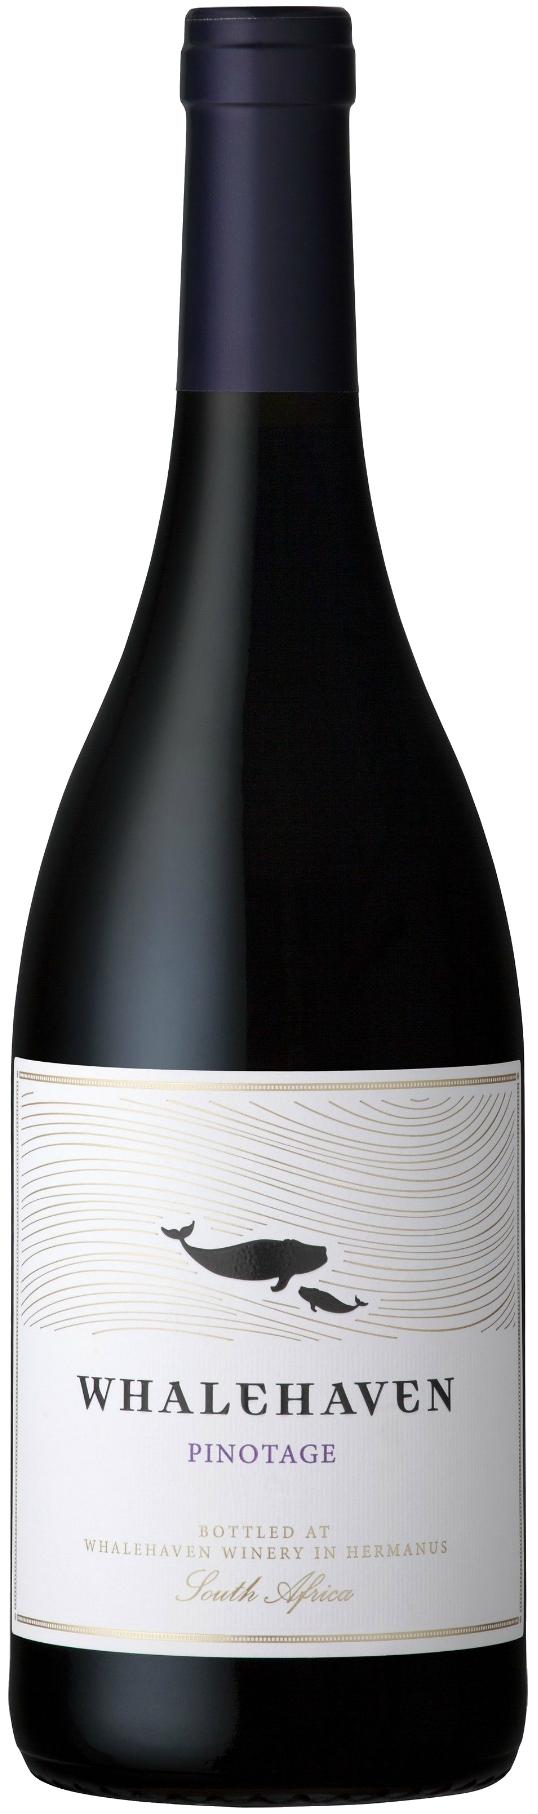 Whalehaven Pinotage 2018